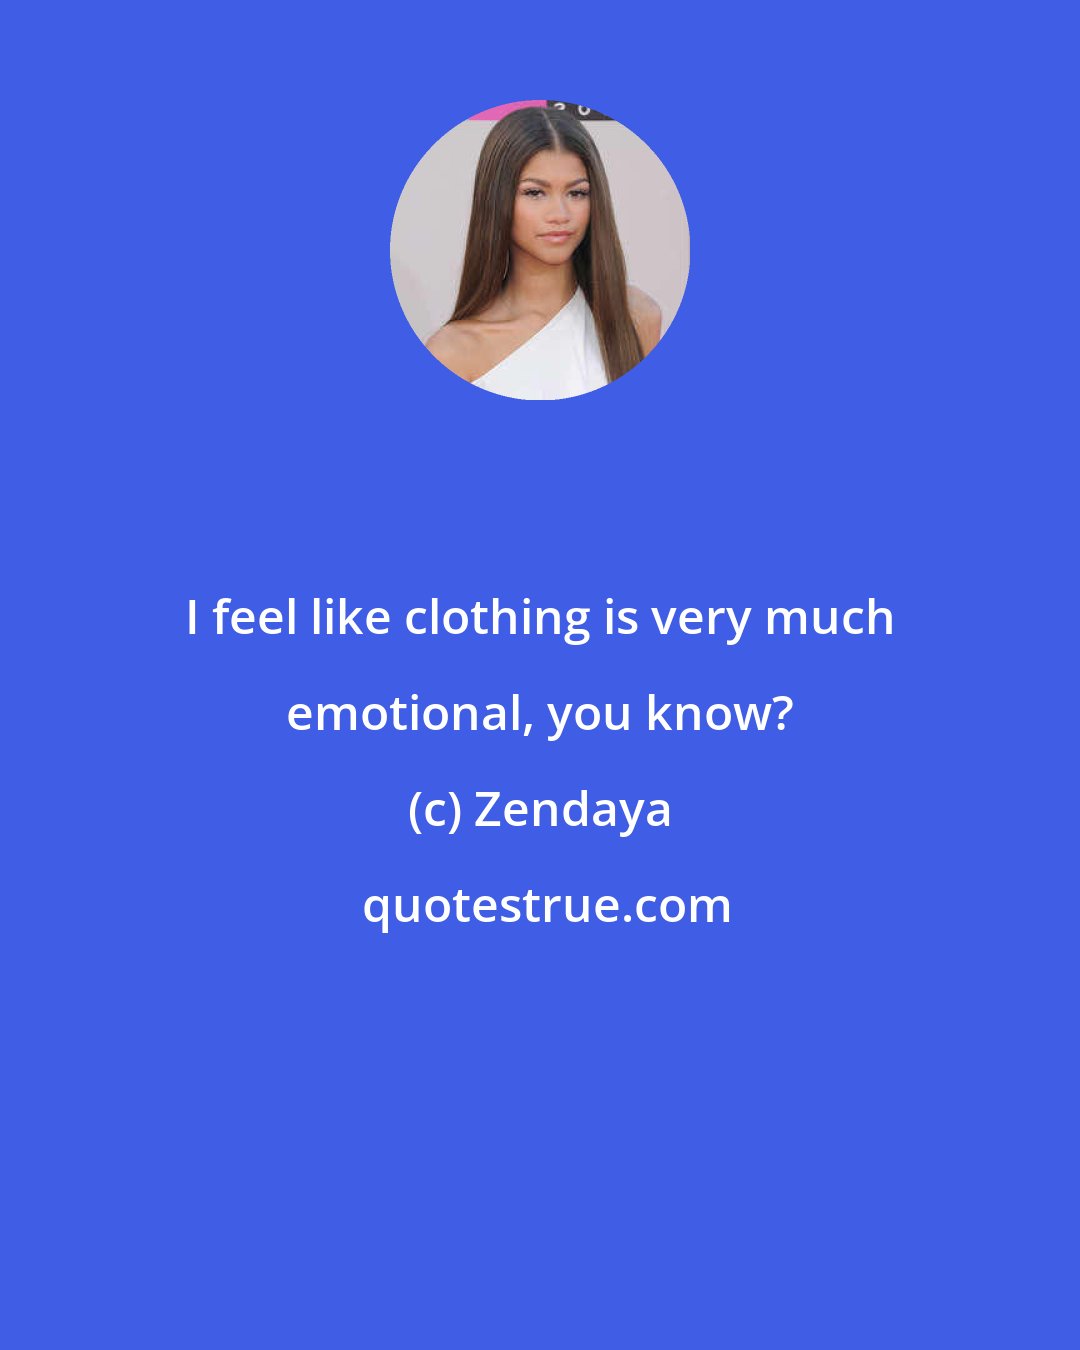 Zendaya: I feel like clothing is very much emotional, you know?